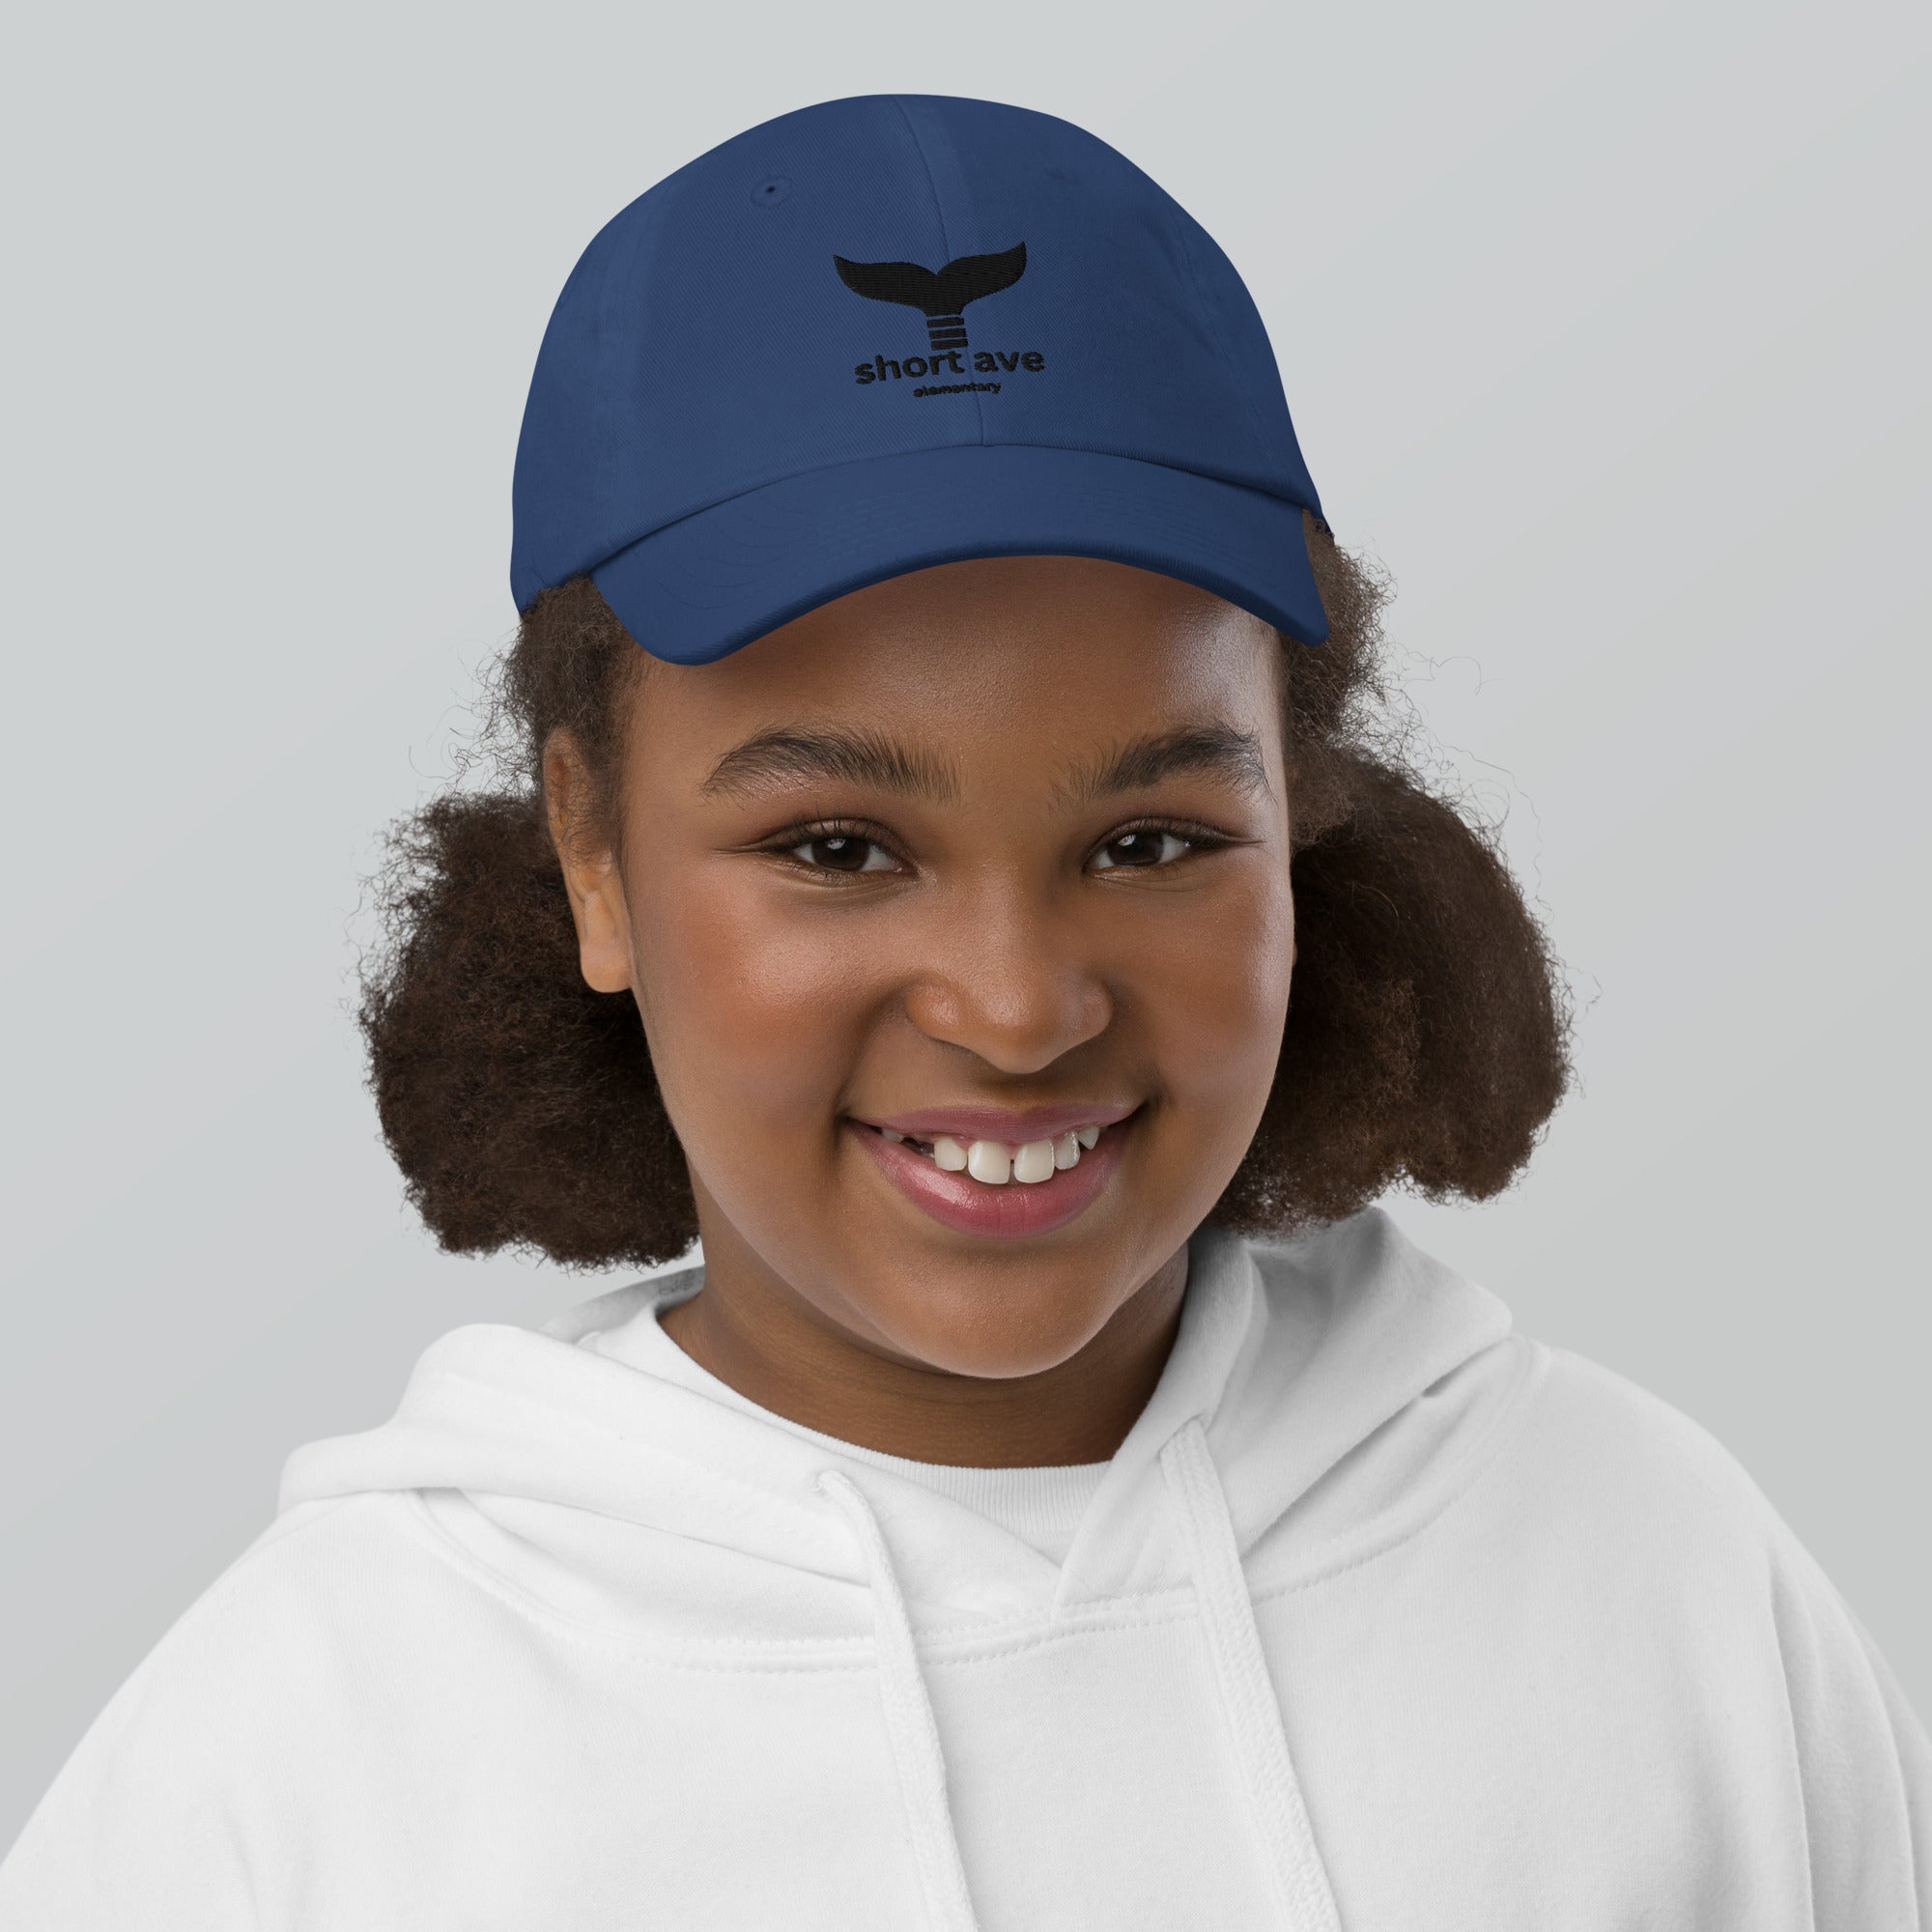 Short Ave Dive Into Learning Youth Baseball Cap